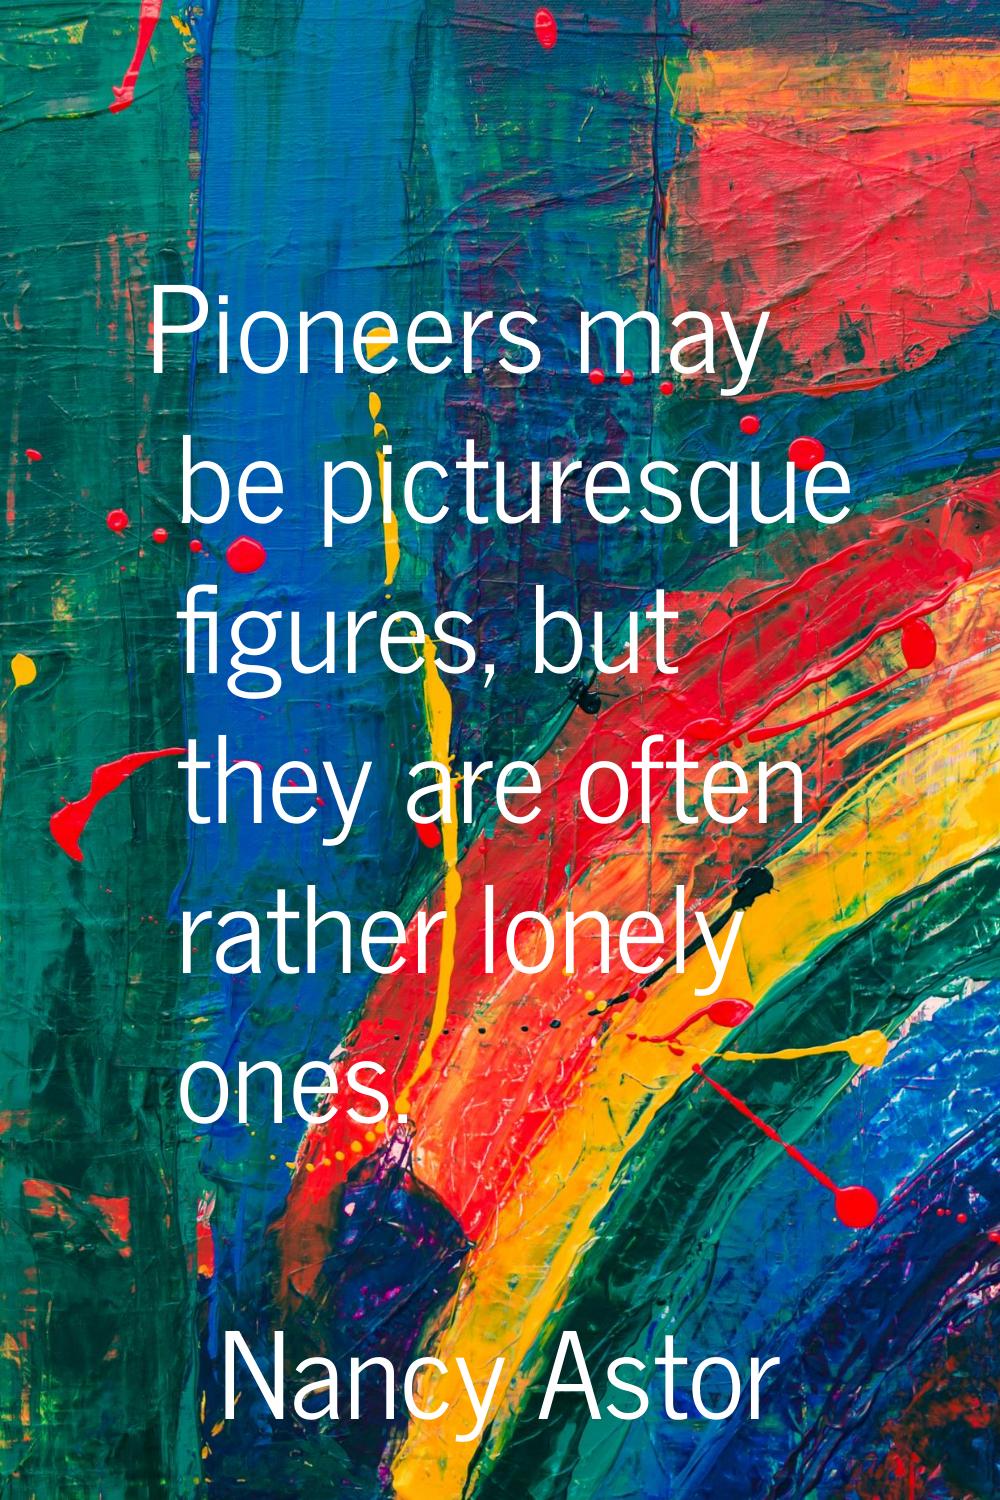 Pioneers may be picturesque figures, but they are often rather lonely ones.